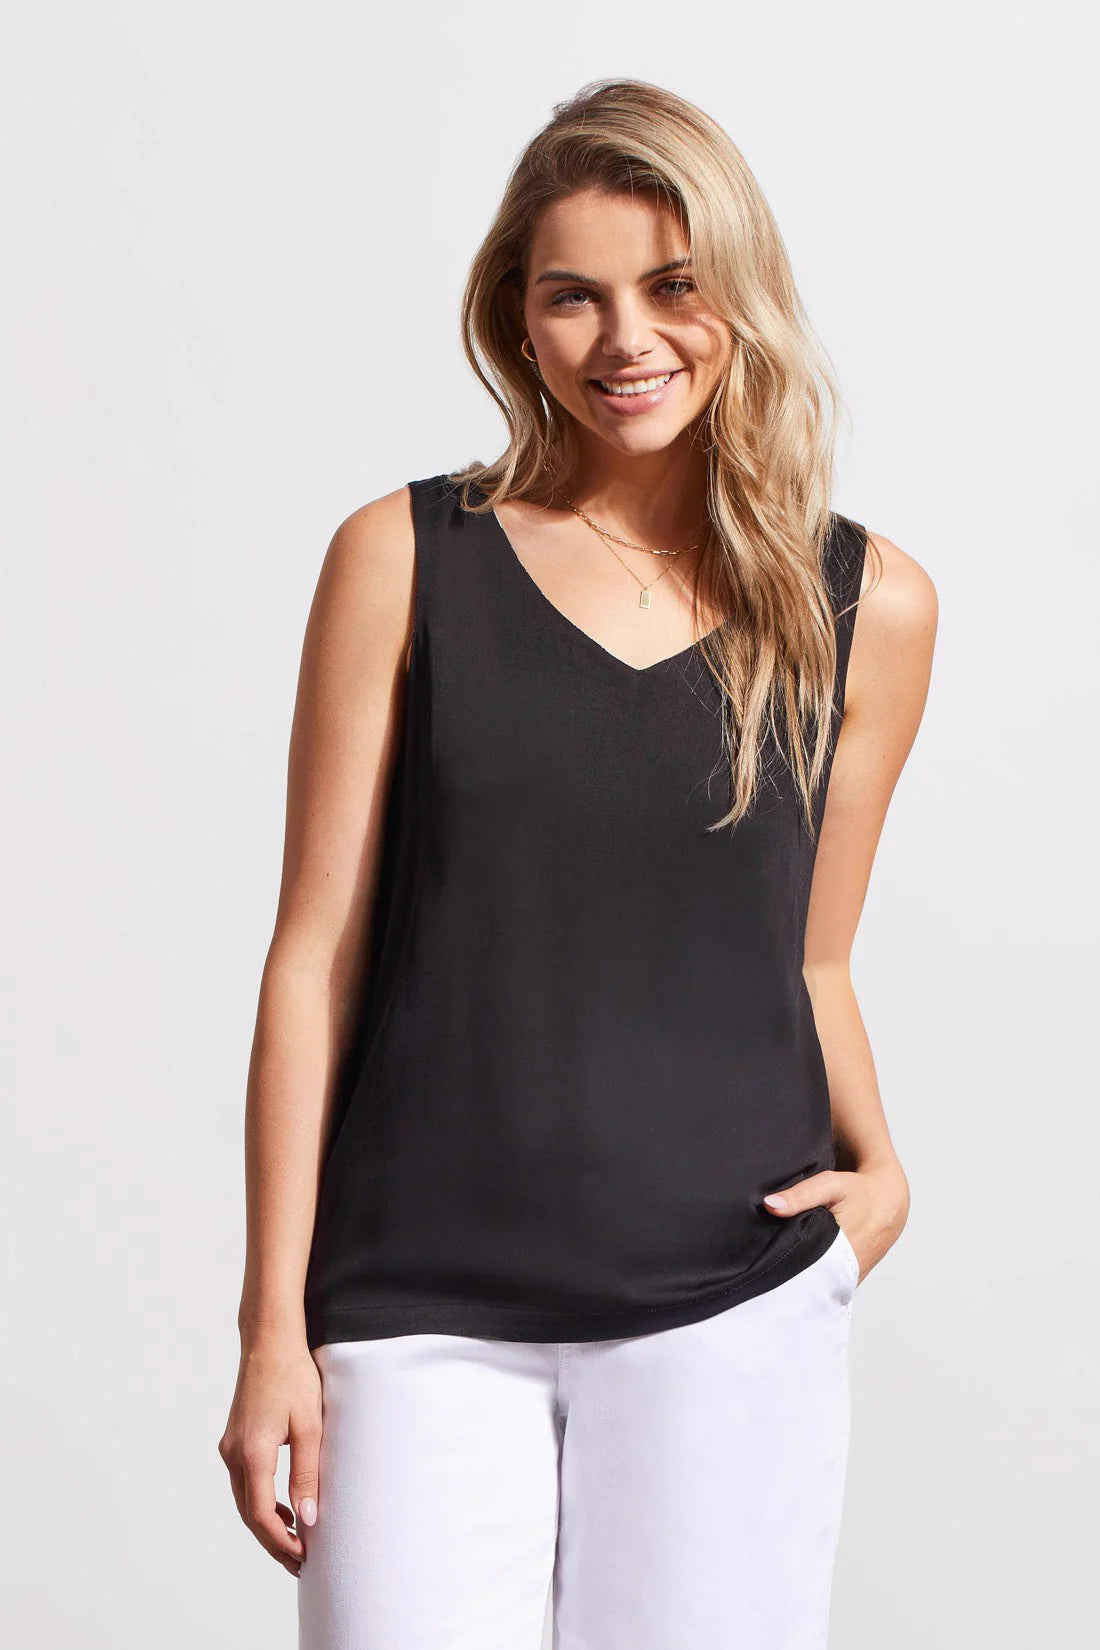 This V-neck cami is the style solution we've all been waiting for because it goes double duty as a reversible solid or print top, giving you endless options for getting dressed in the most fashionable way.